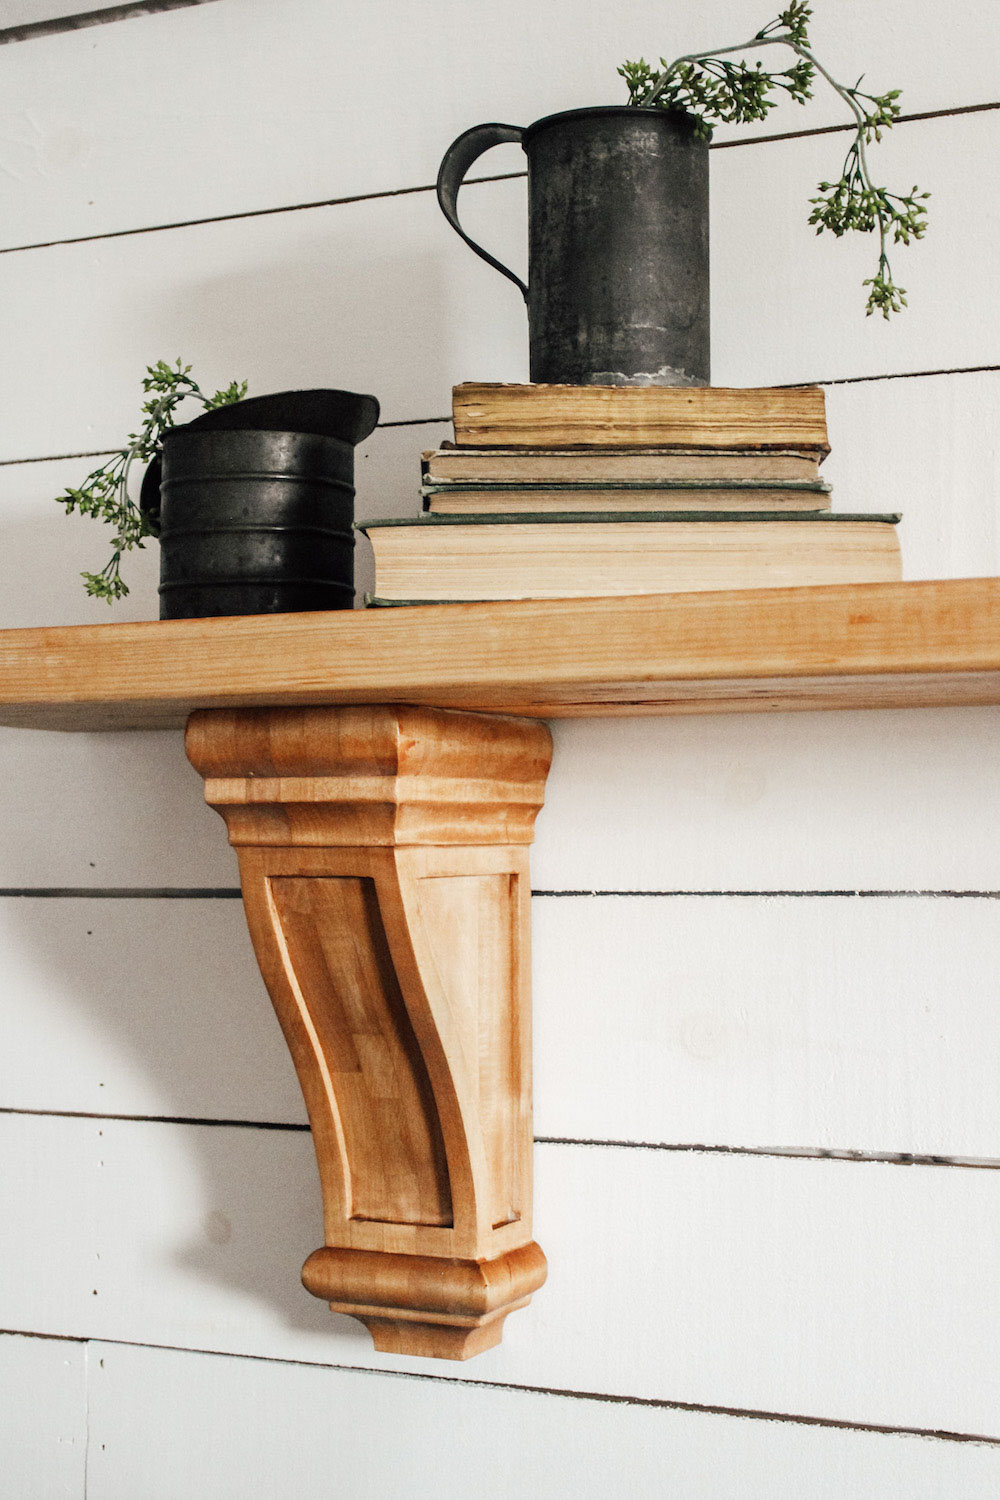 A large wooden wall shelf made with corbels is decorated with books and metal cans..